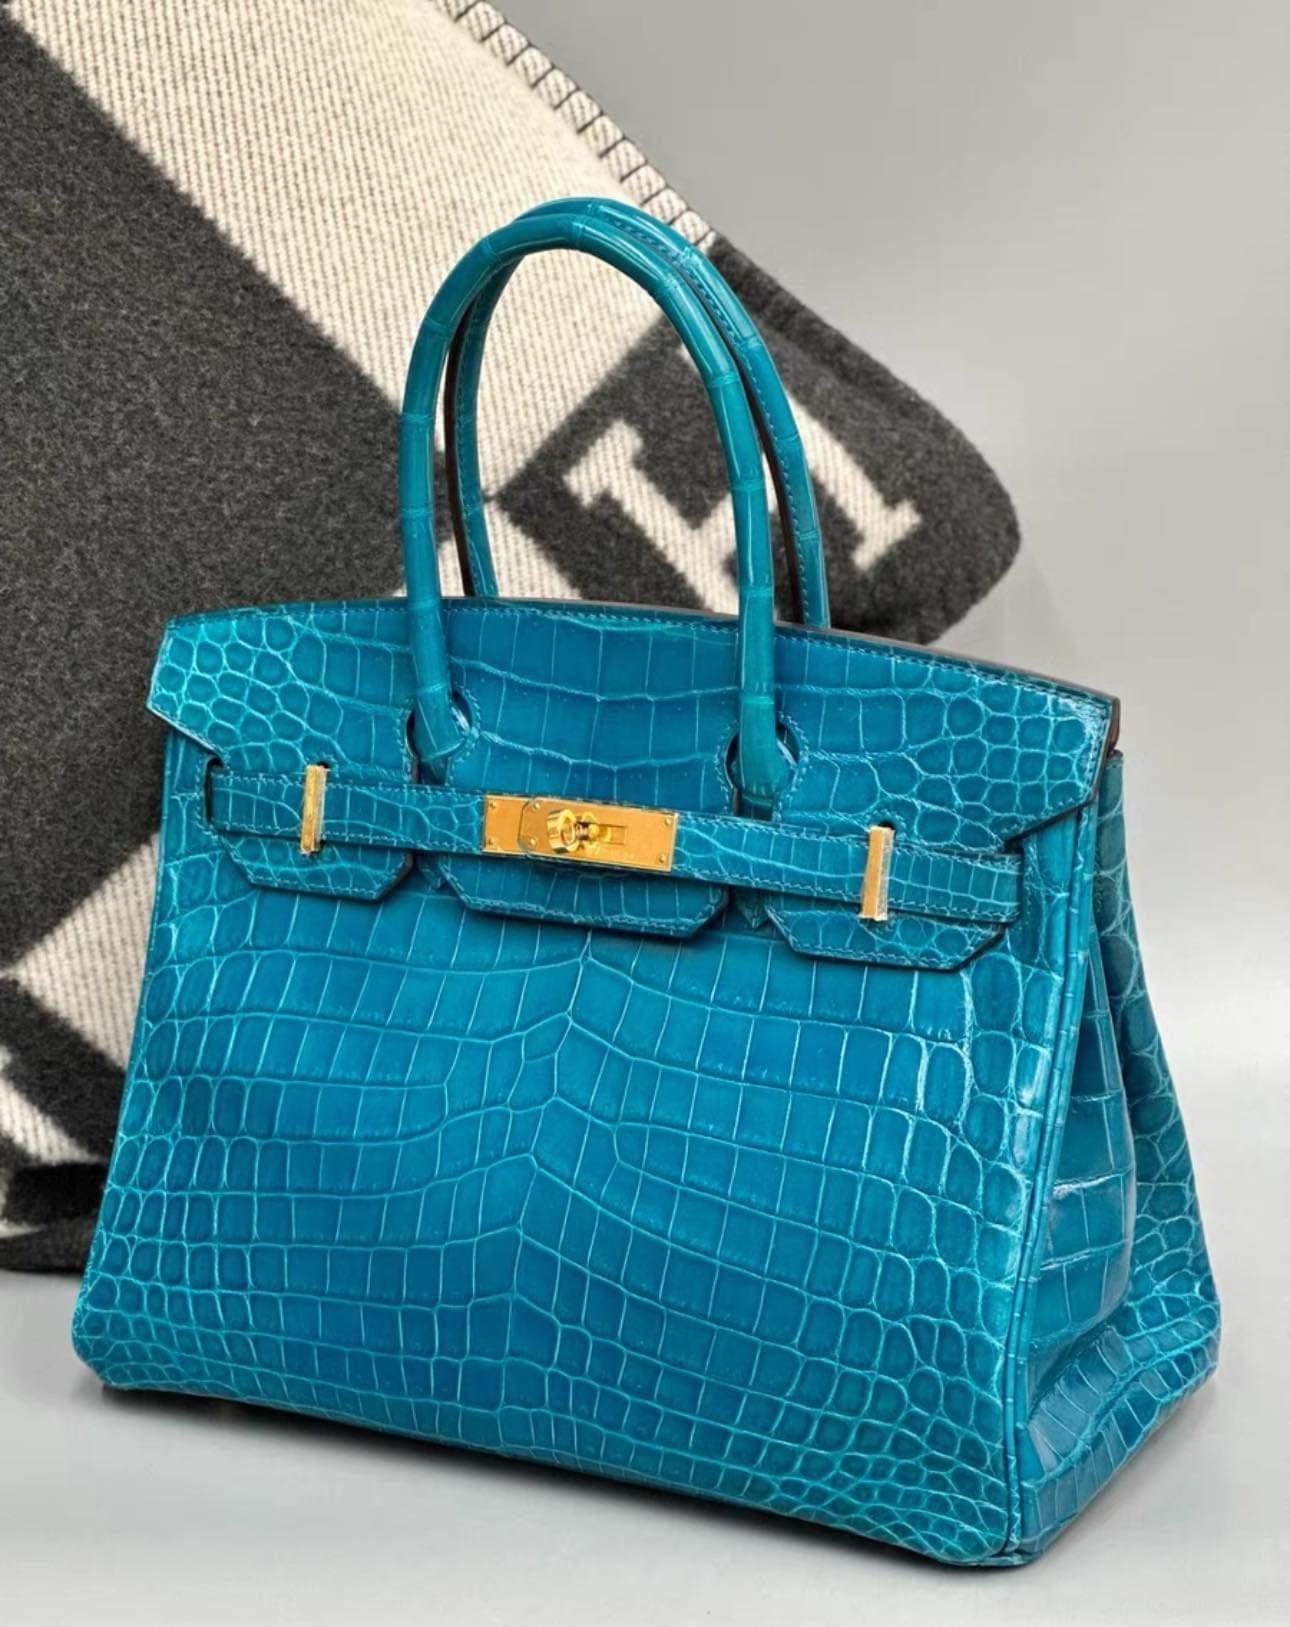 This Hermès Birkin 30cm bag is made from exotic Niloticus Crocodile skin, which originates from the Nile River and is the premier material used by Hermes. Exotic, cheerful and yet sophisticated with gold-tone hardware emphasizing the cool blue